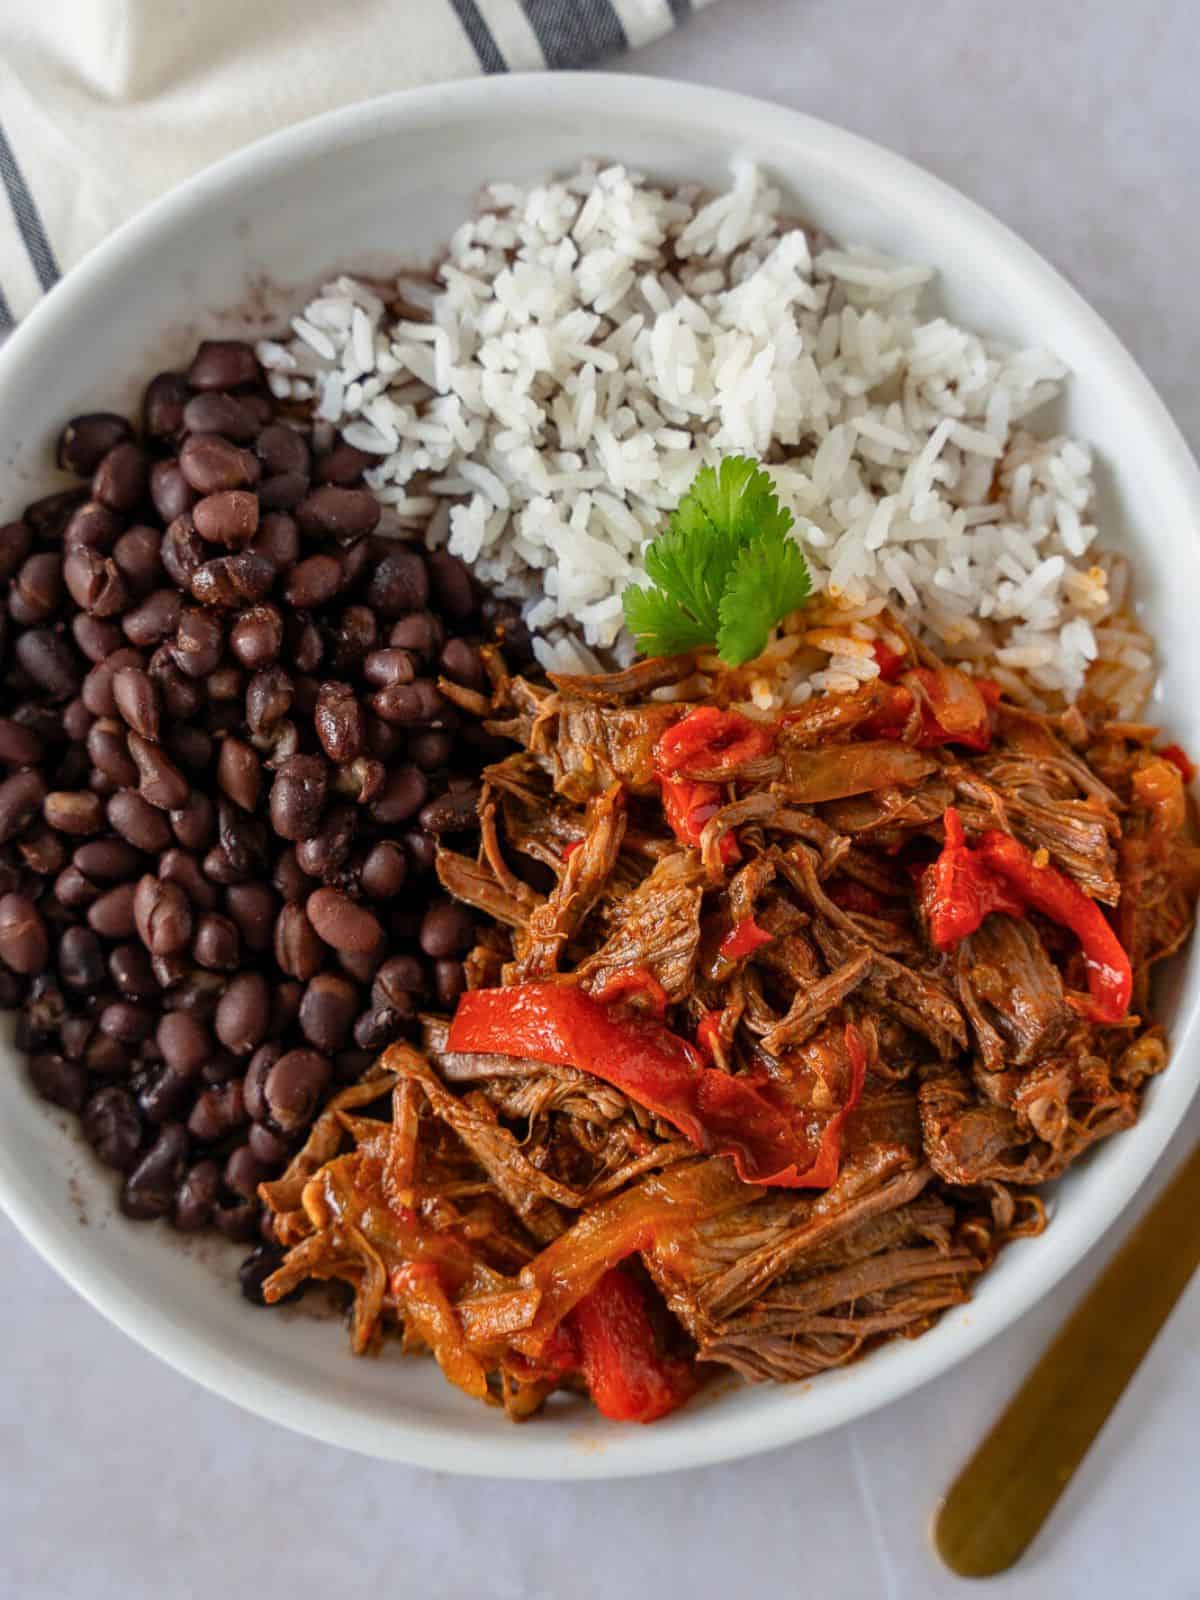 Overhead view of Mexican pot roast on a plate with white rice and black beans.